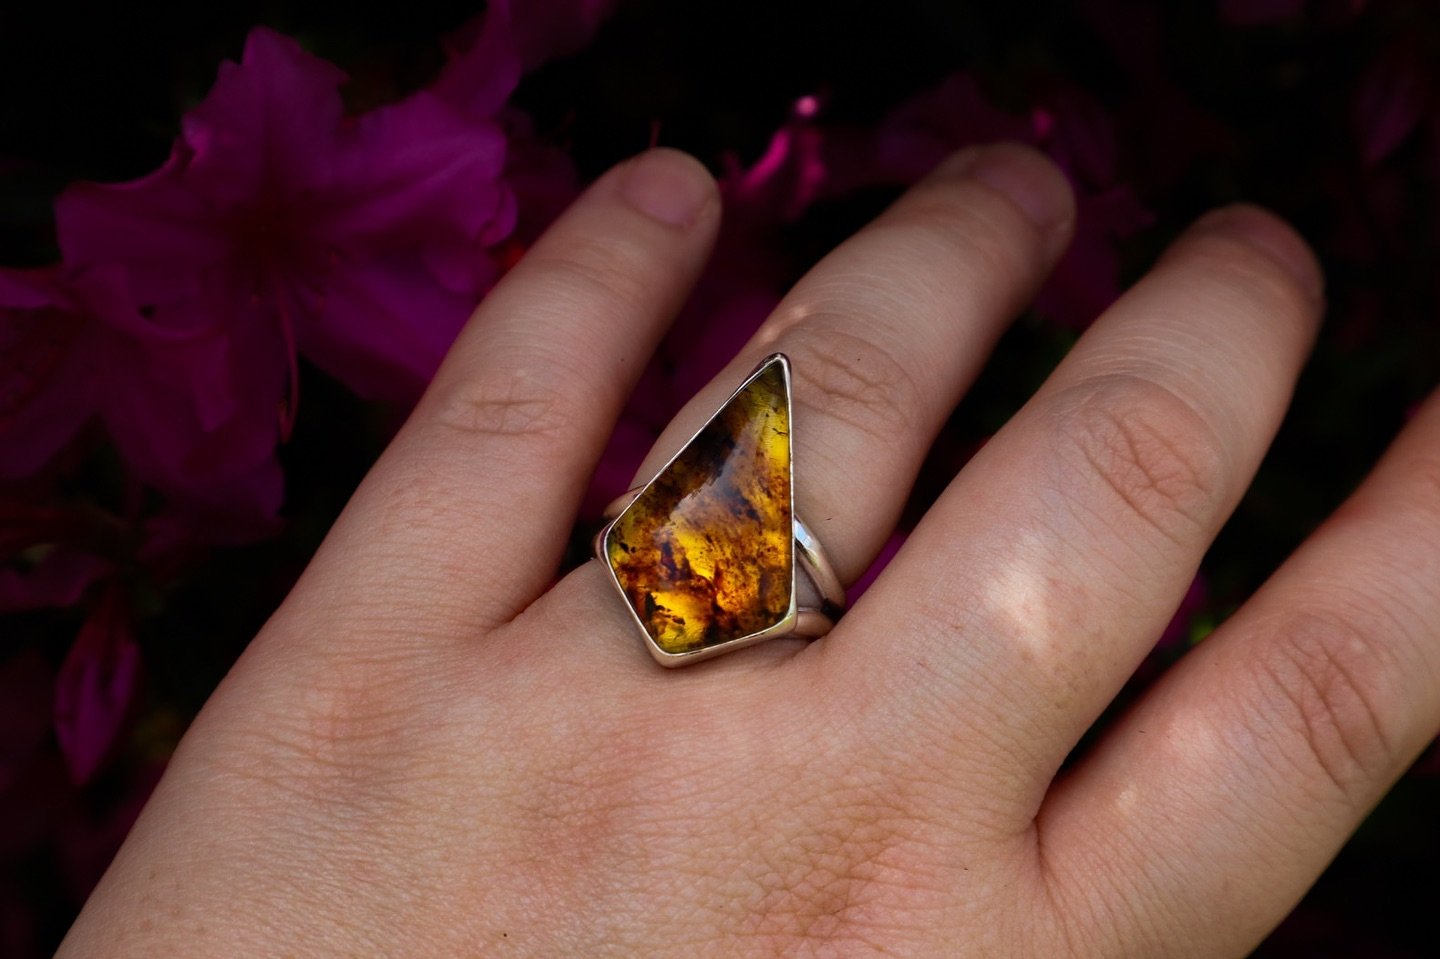 A little honey, anyone?! This beautiful amber ring is up for grabs!
.
.
.
.
.
.
.
.
.
.
.
.
.
#handmadejewelry #handmaderings #handmadering #amberring #amberjewelry #ooakjewelry #silverjewelry #sterlingsilverjewelry #amber #silverrings #silverring #s